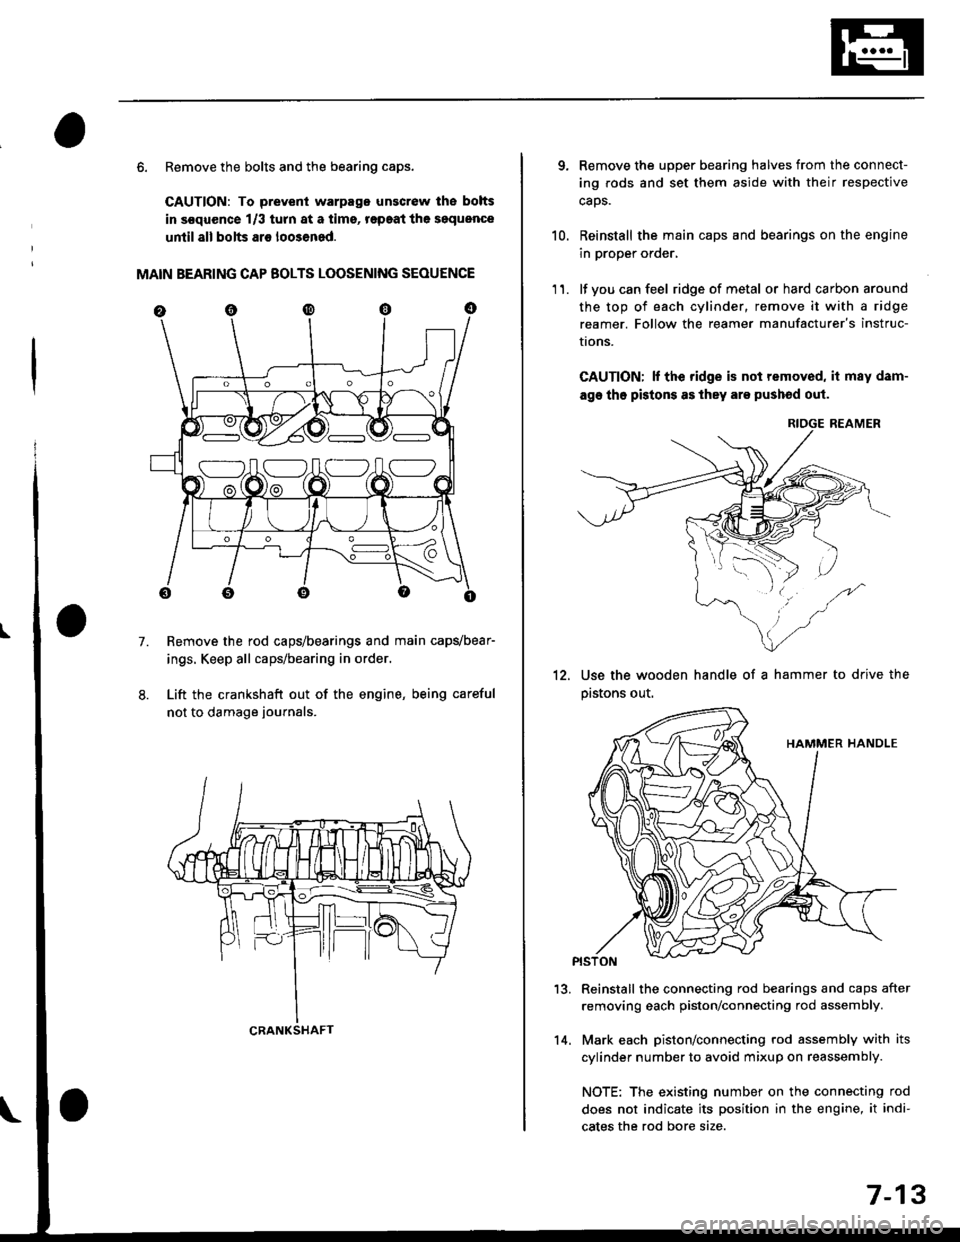 HONDA CIVIC 1998 6.G Workshop Manual 6. Remove the bolts and the bearing caps.
CAUTION: To prevenl warpago unscrow lhe bolts
in s€quence 1/3 turn at a tims, r€paat the soquence
until all bolts ar€ loo3ened.
MAIN BEARING CAP BOLTS L